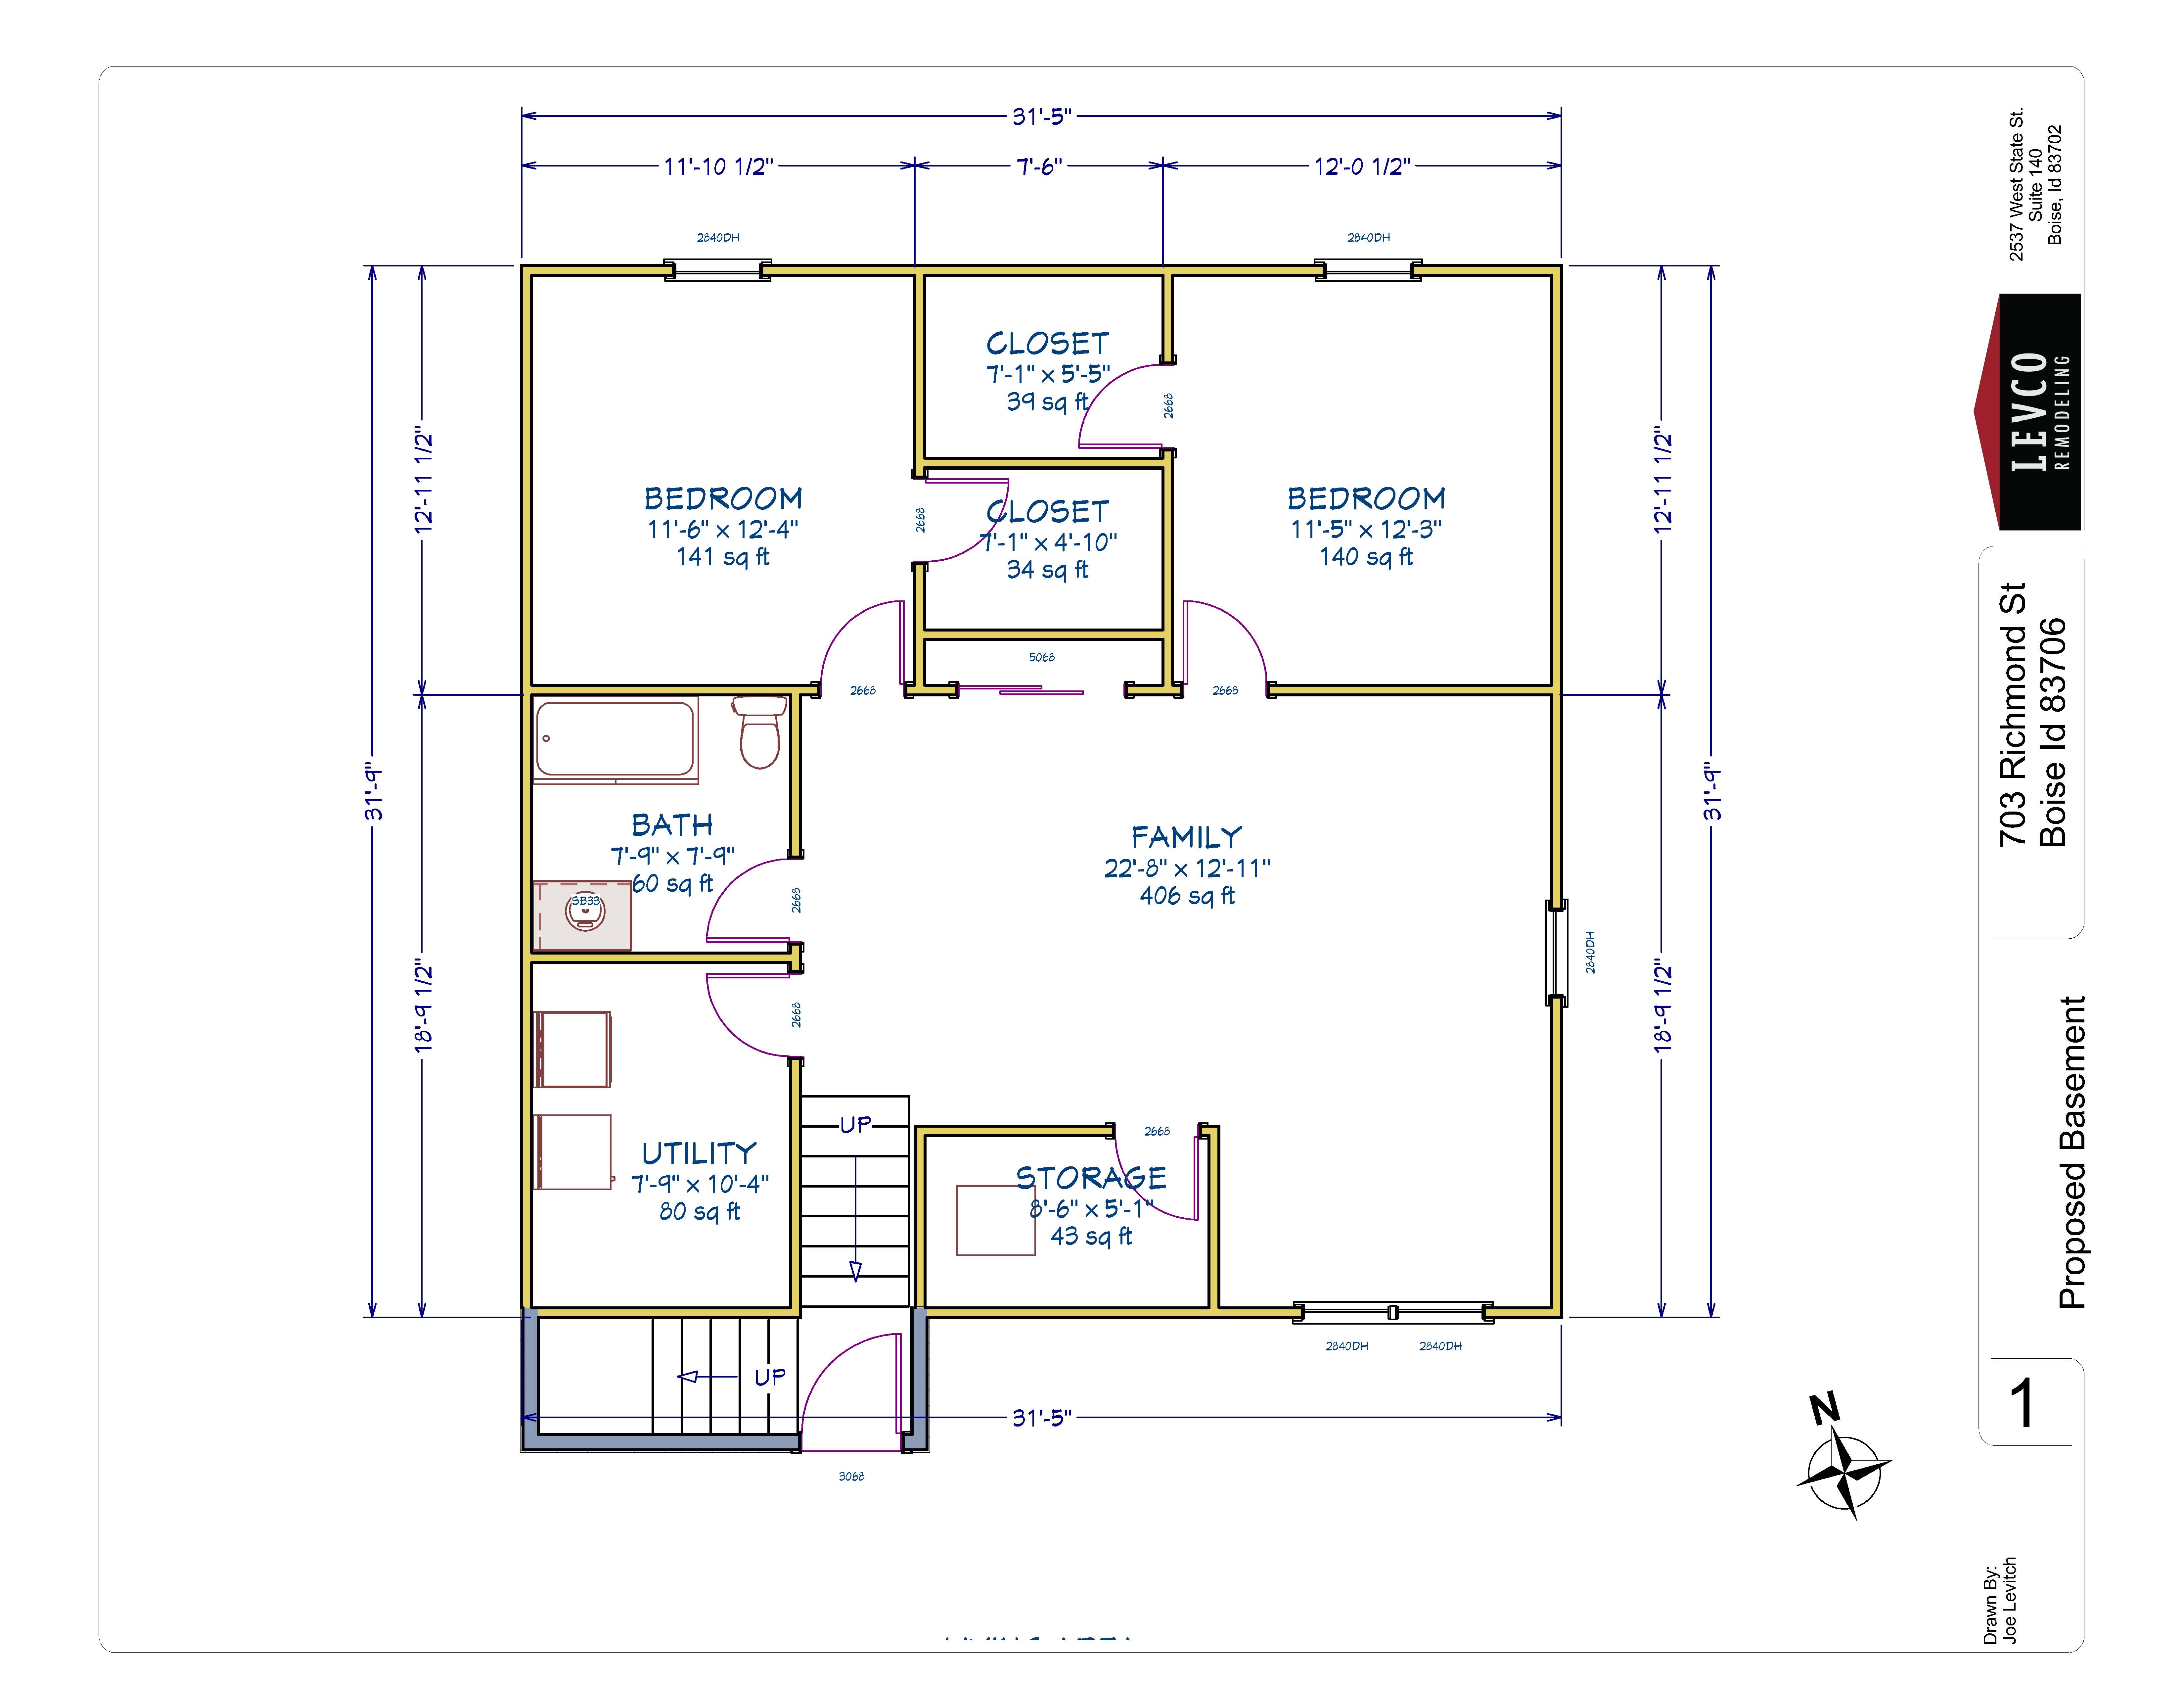 Proposed Basement